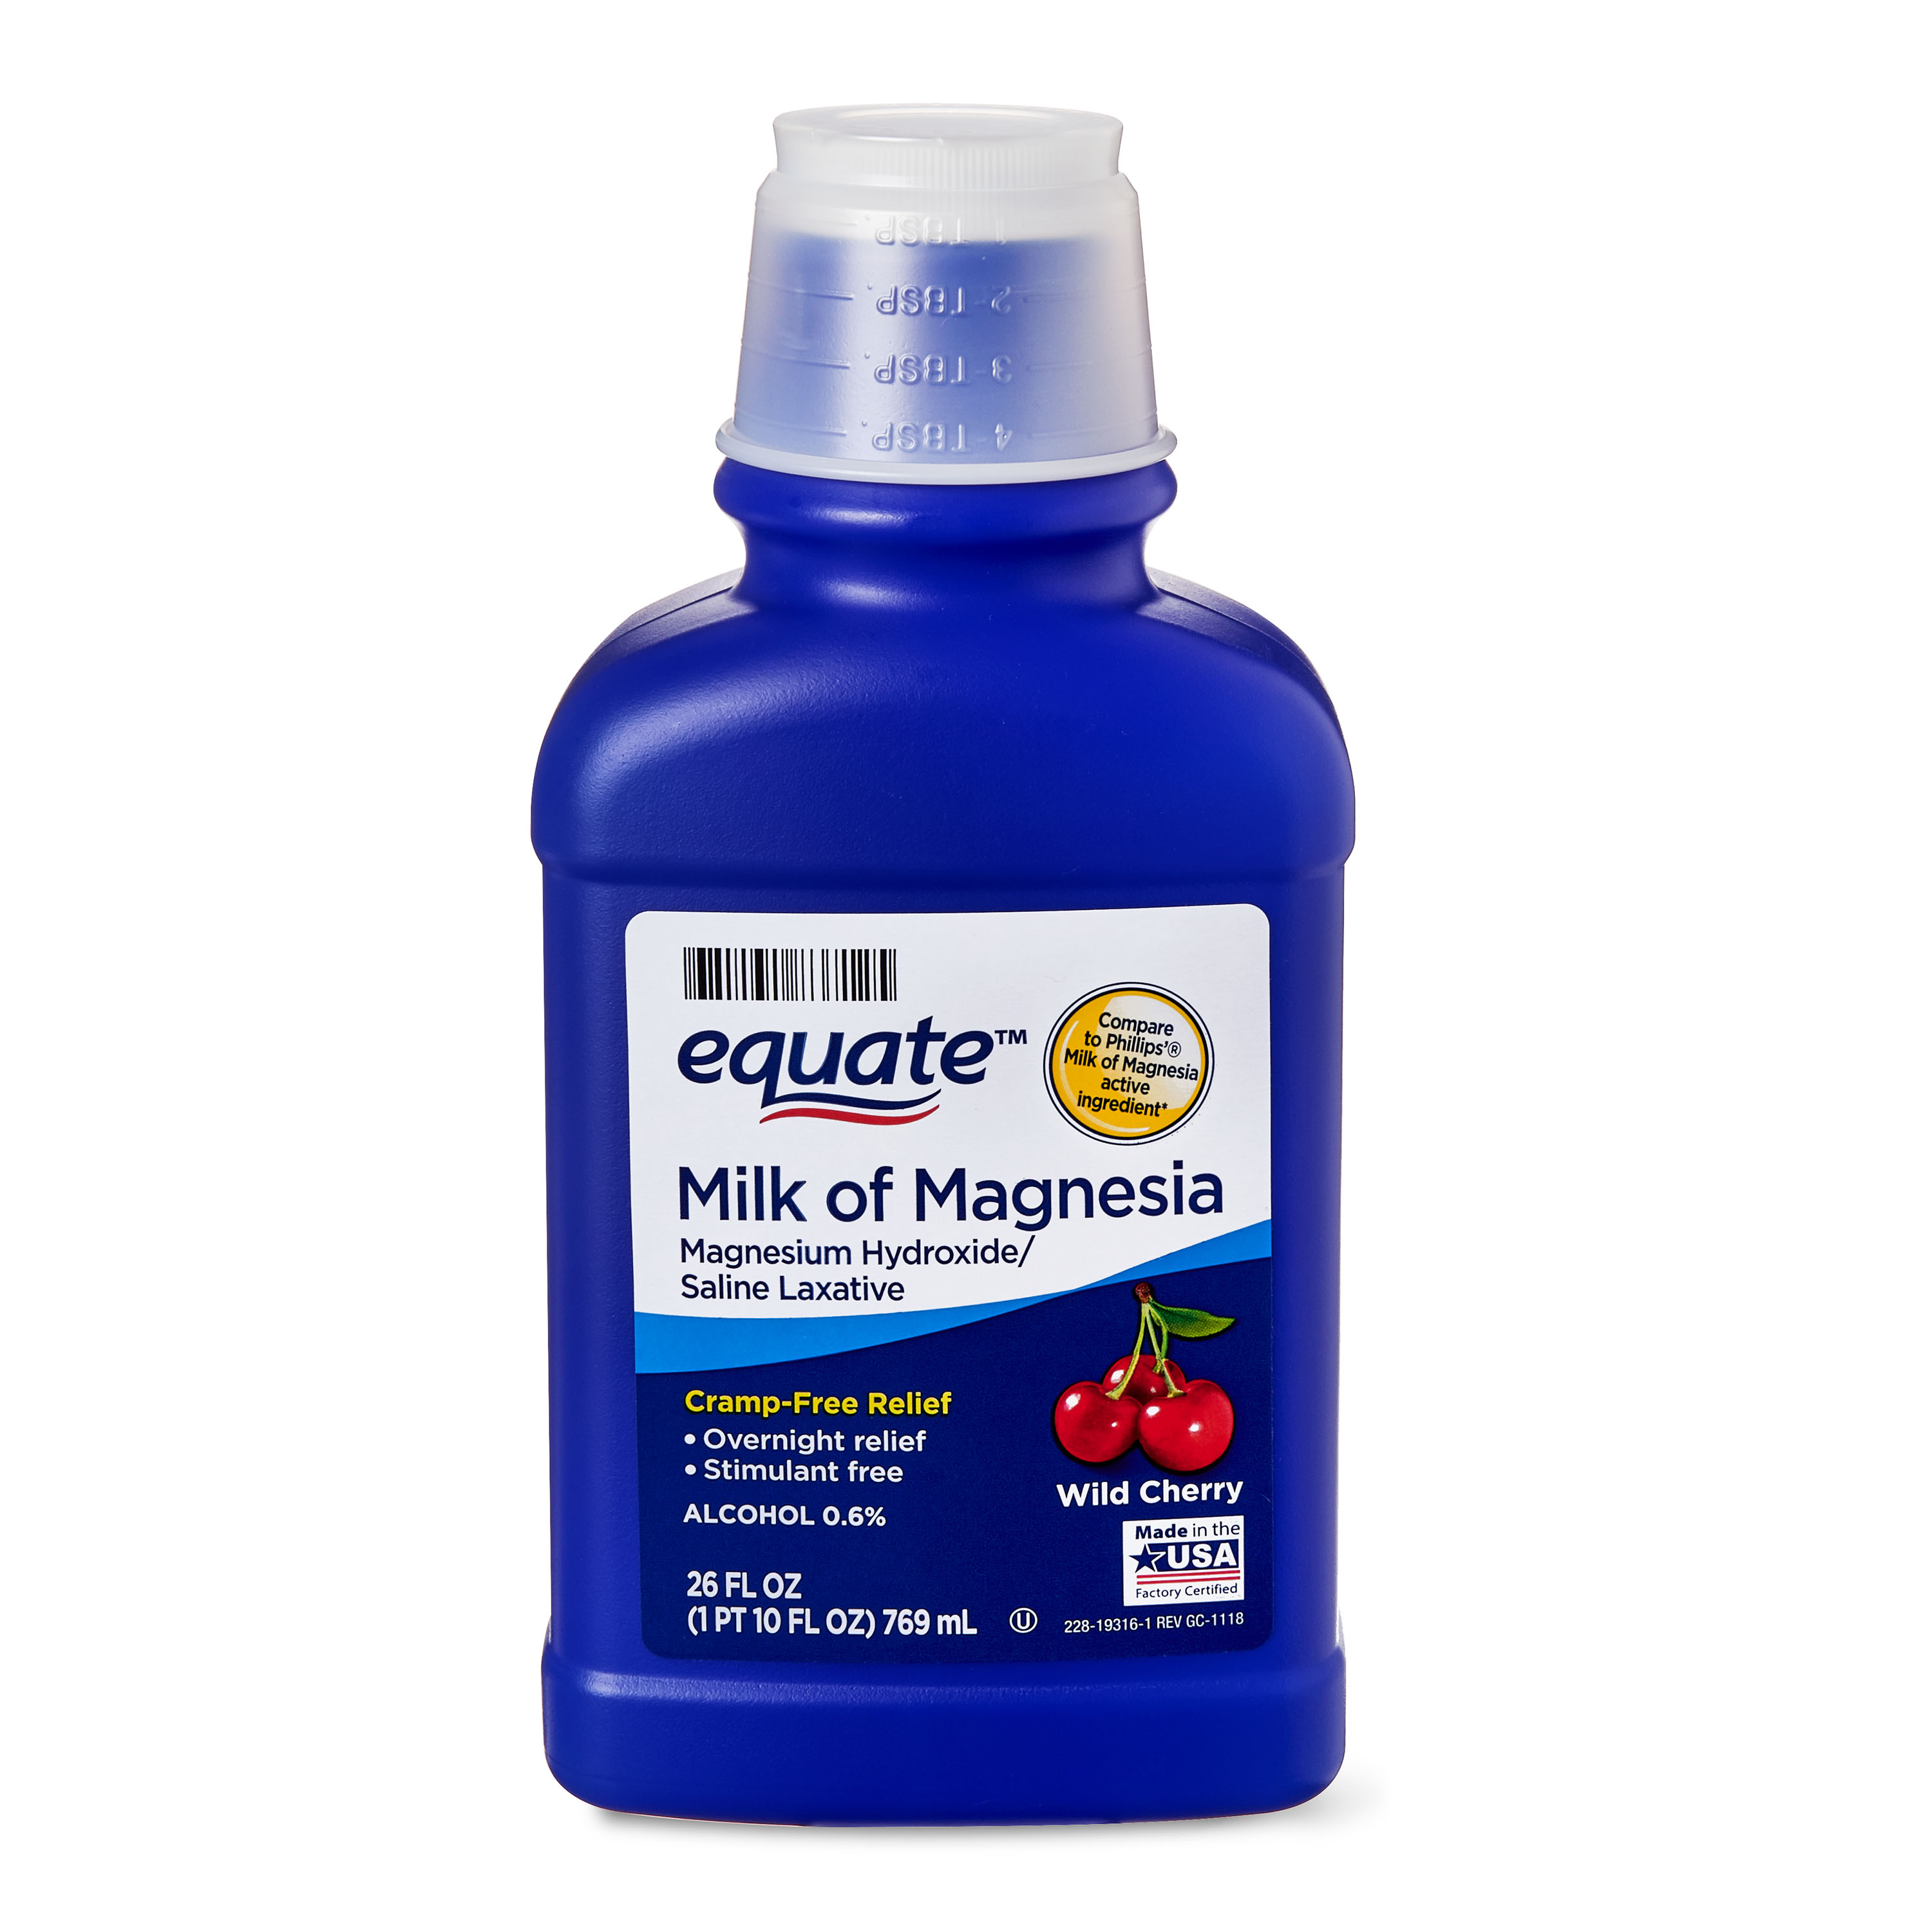 Equate Wild Cherry Milk of Magnesia, 26 fl. oz., over-the-counter, Laxative - image 2 of 9